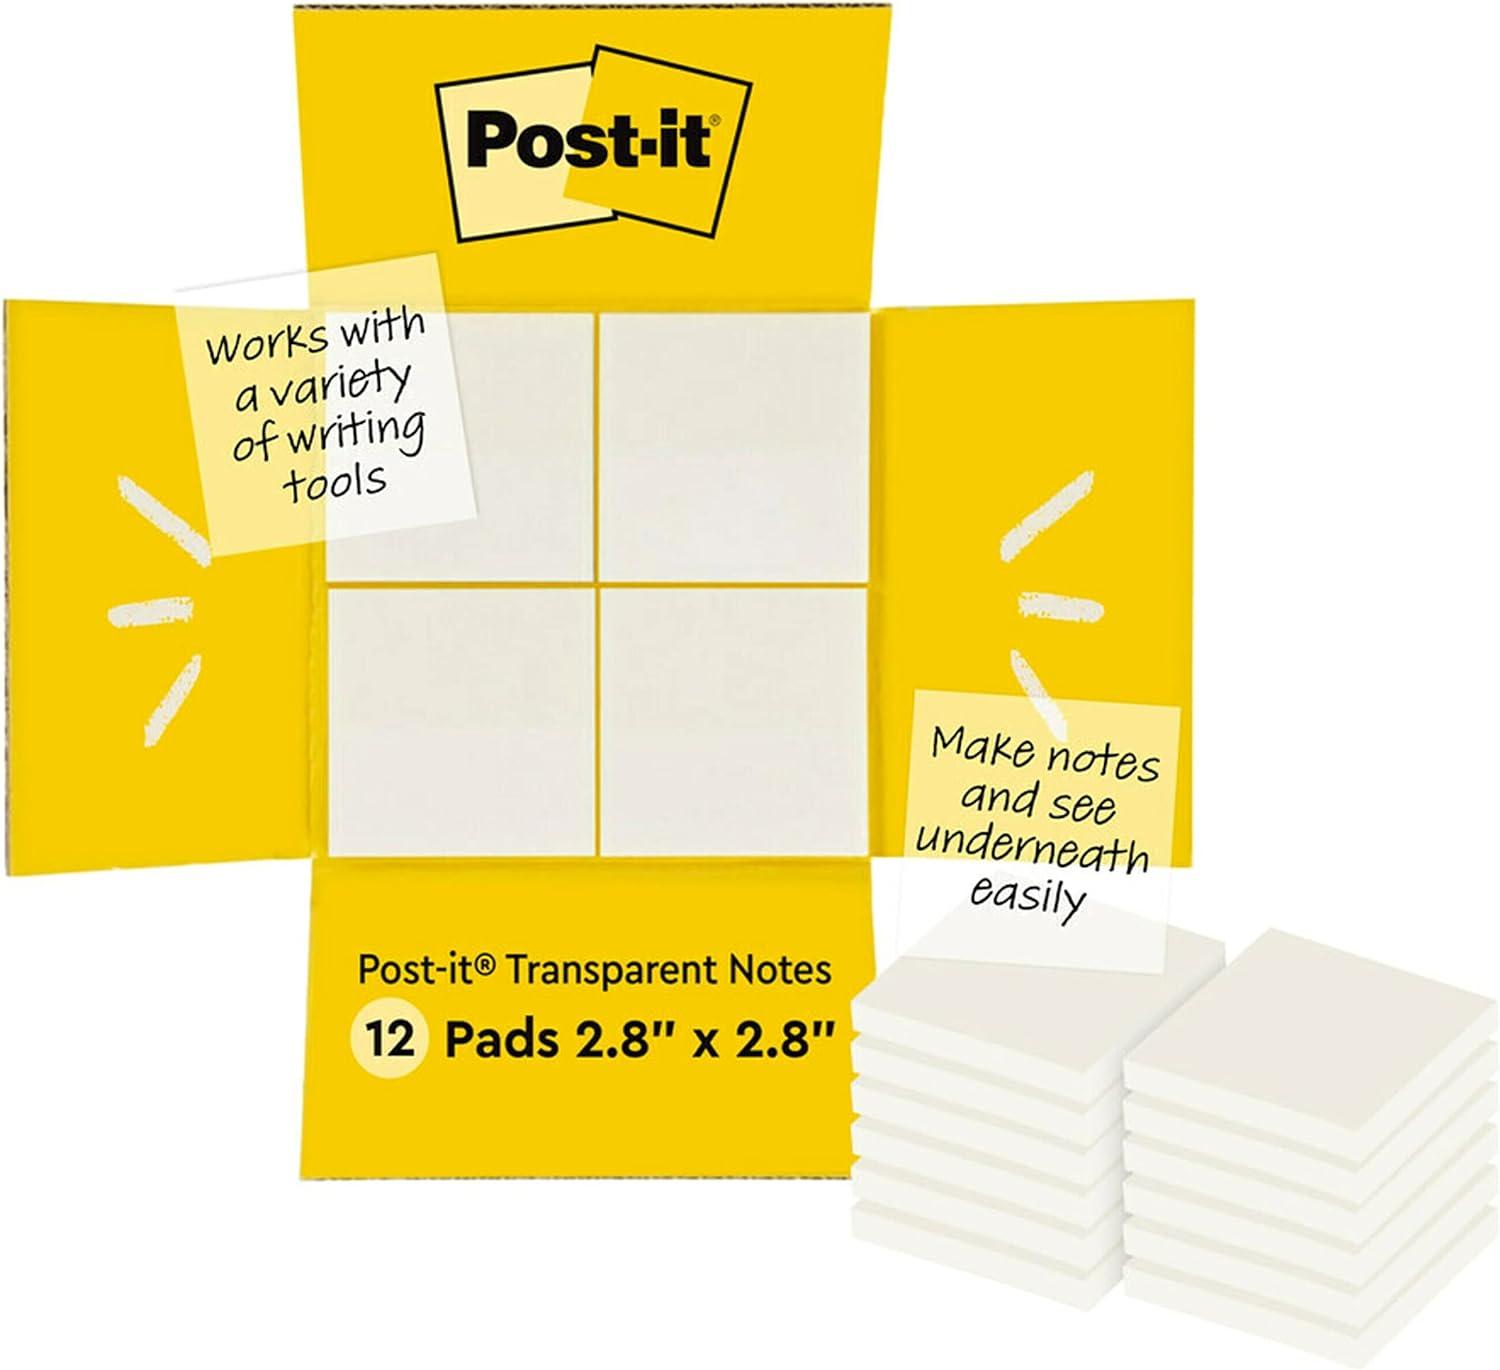 post-it transparent notes clear sticky notes to markup textbooks and planners safely minimalist aesthetic